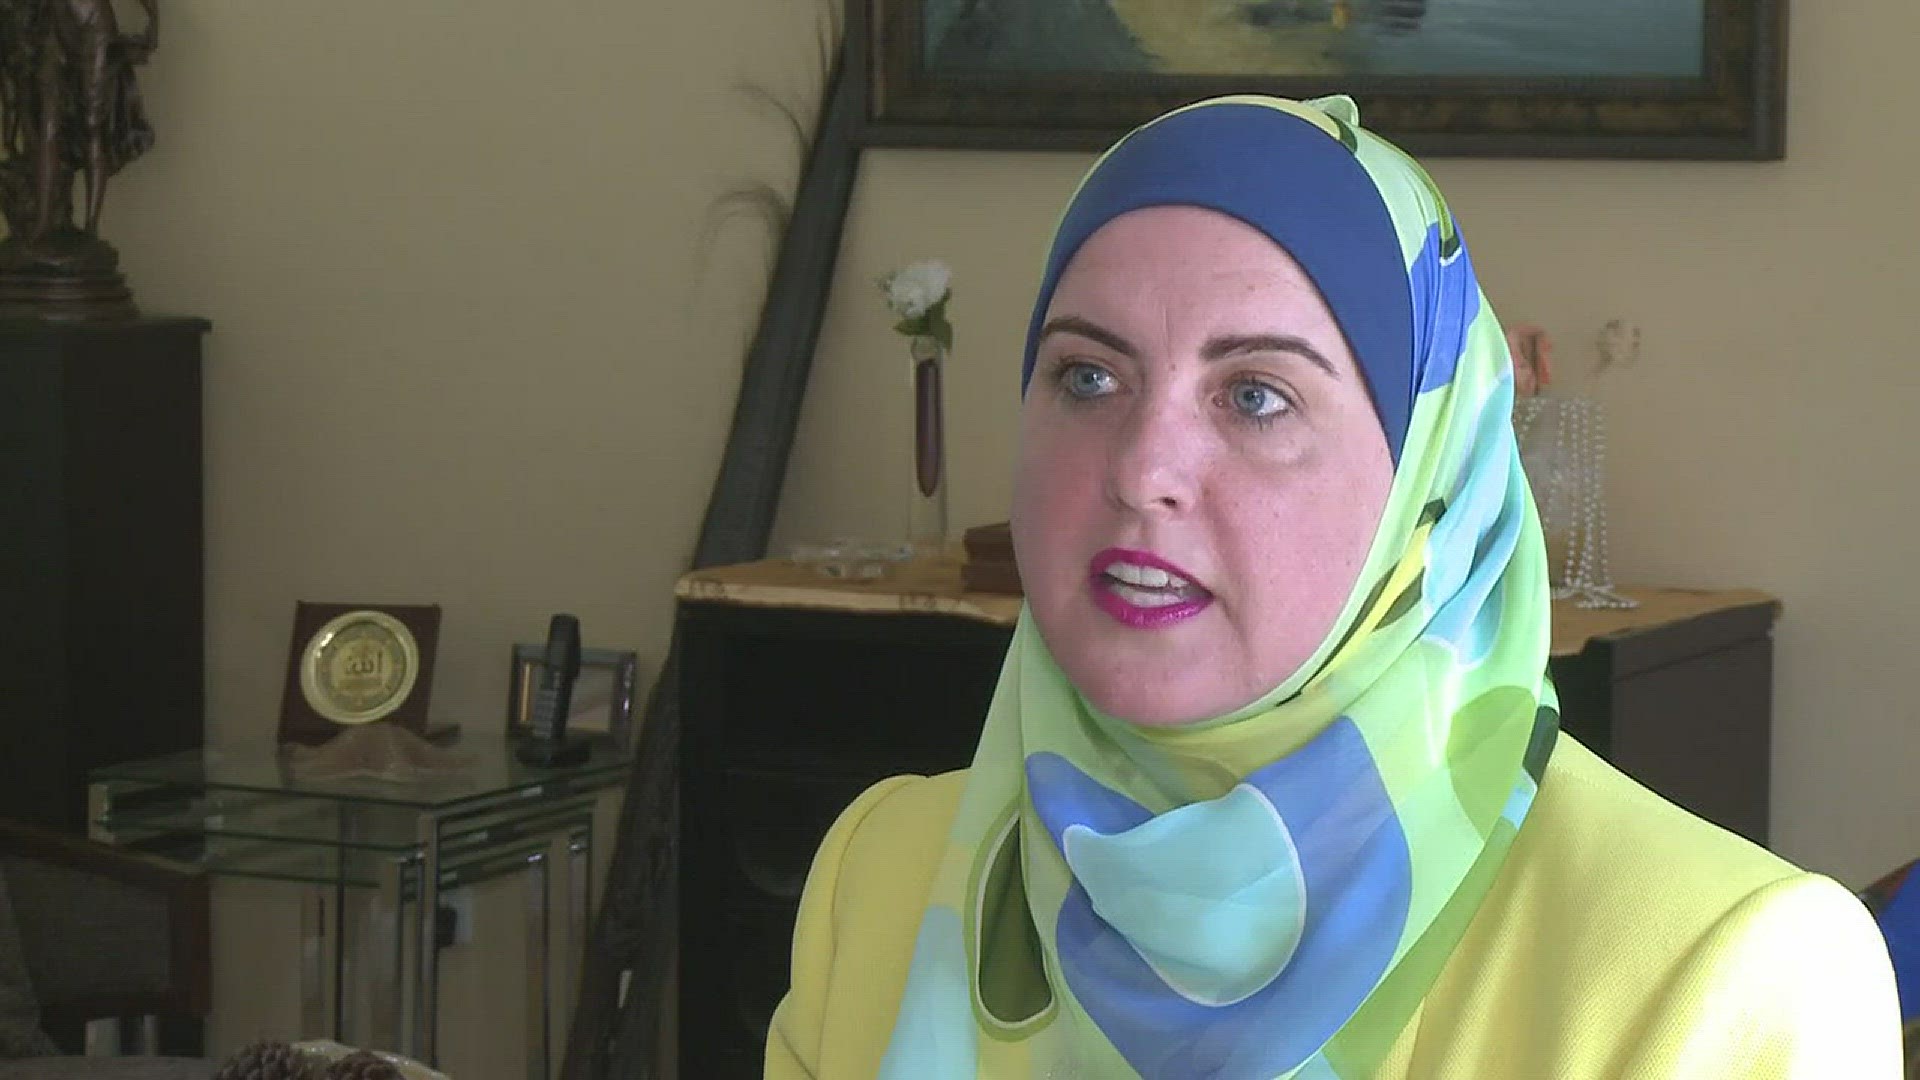 Deedra Abboud is getting support from an her opponent, Sen. Jeff Flake.